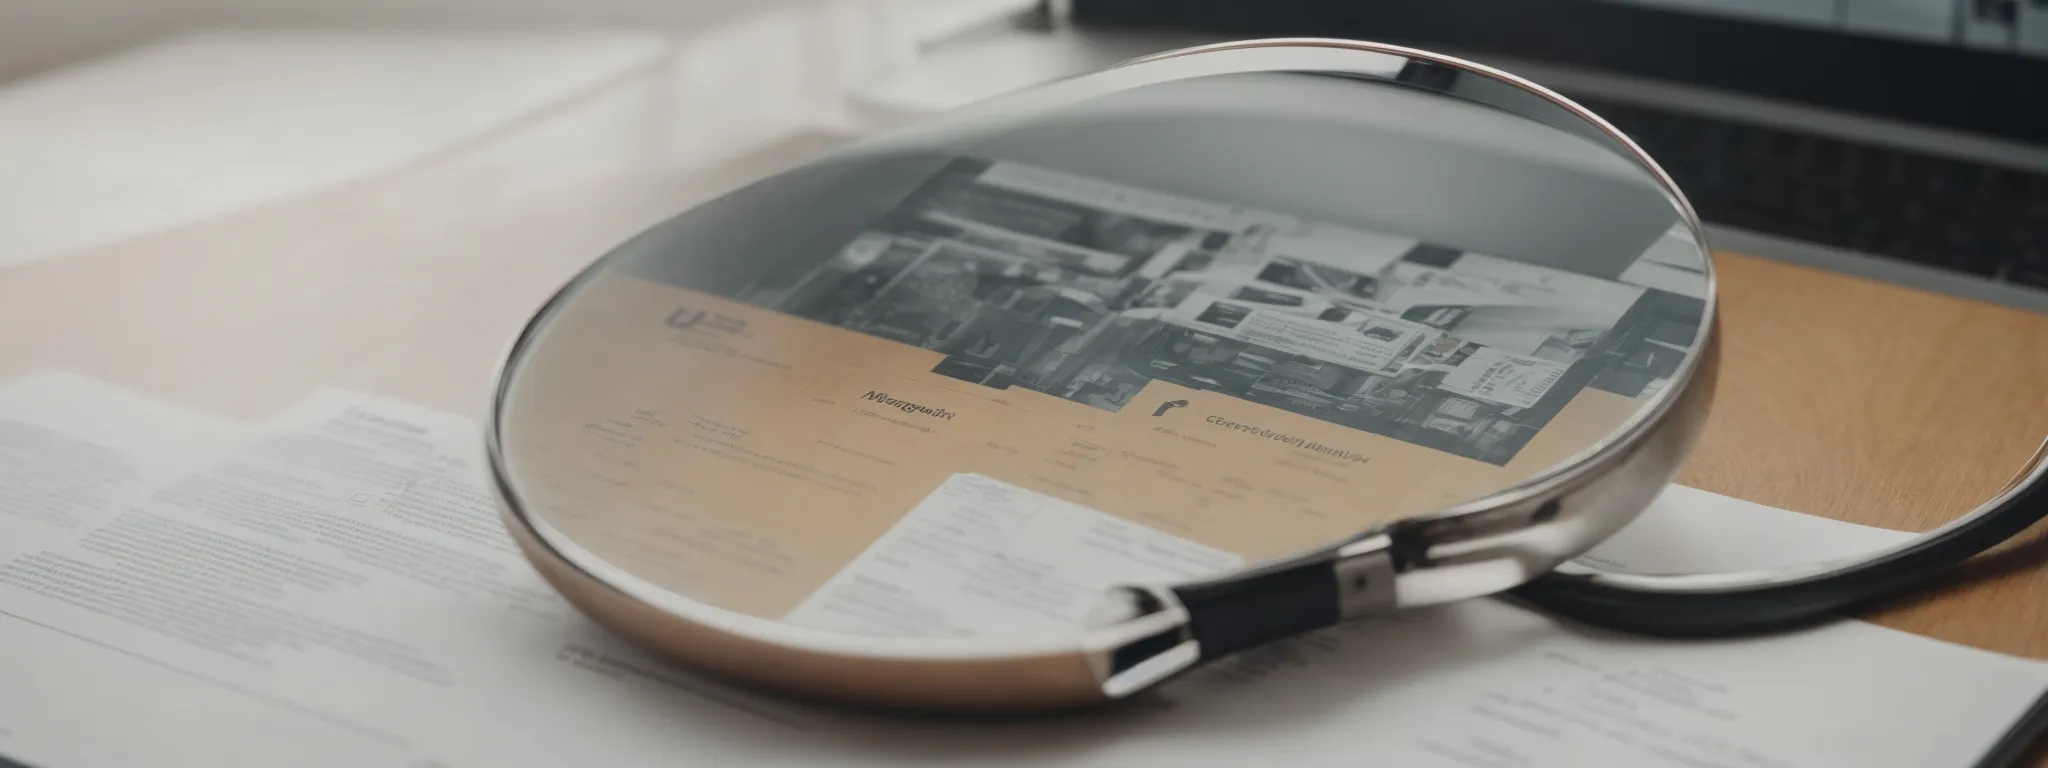 a magnifying glass lies beside a user interface wireframe on a desk, symbolizing the enhancement and analysis of a website's appeal and visibility.